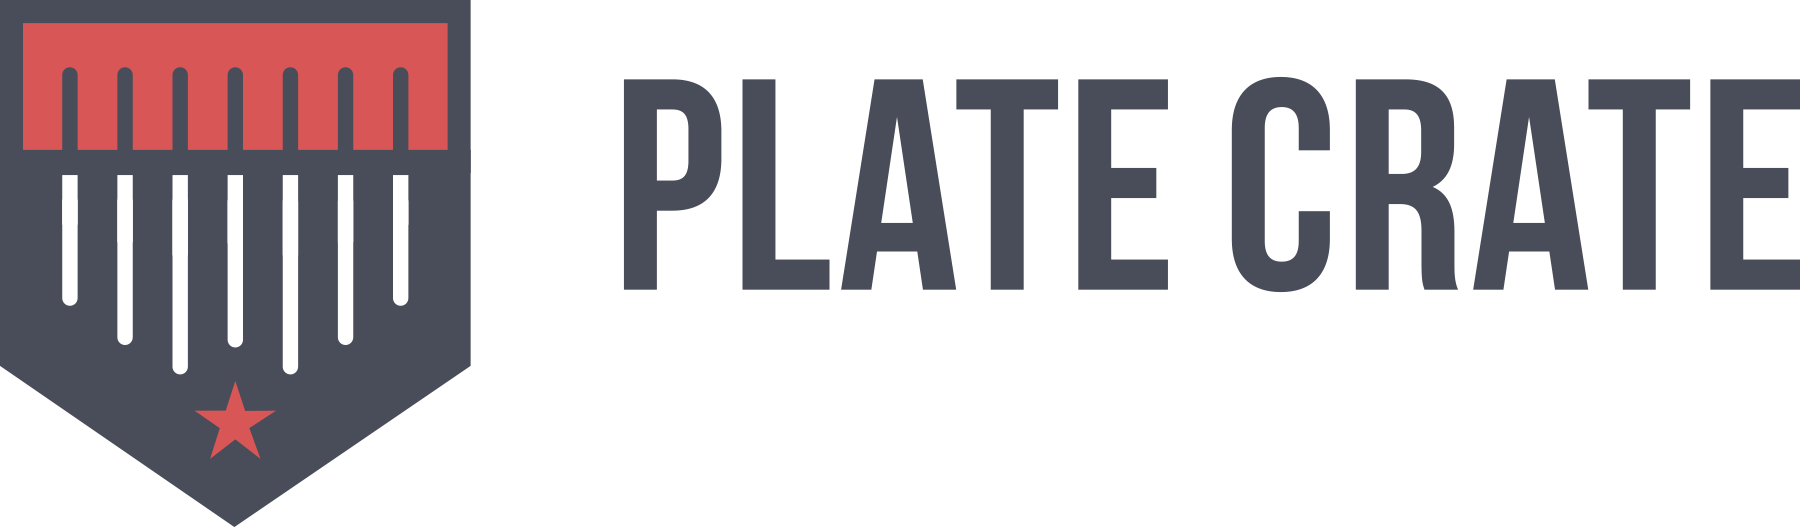 Plate Crate logo